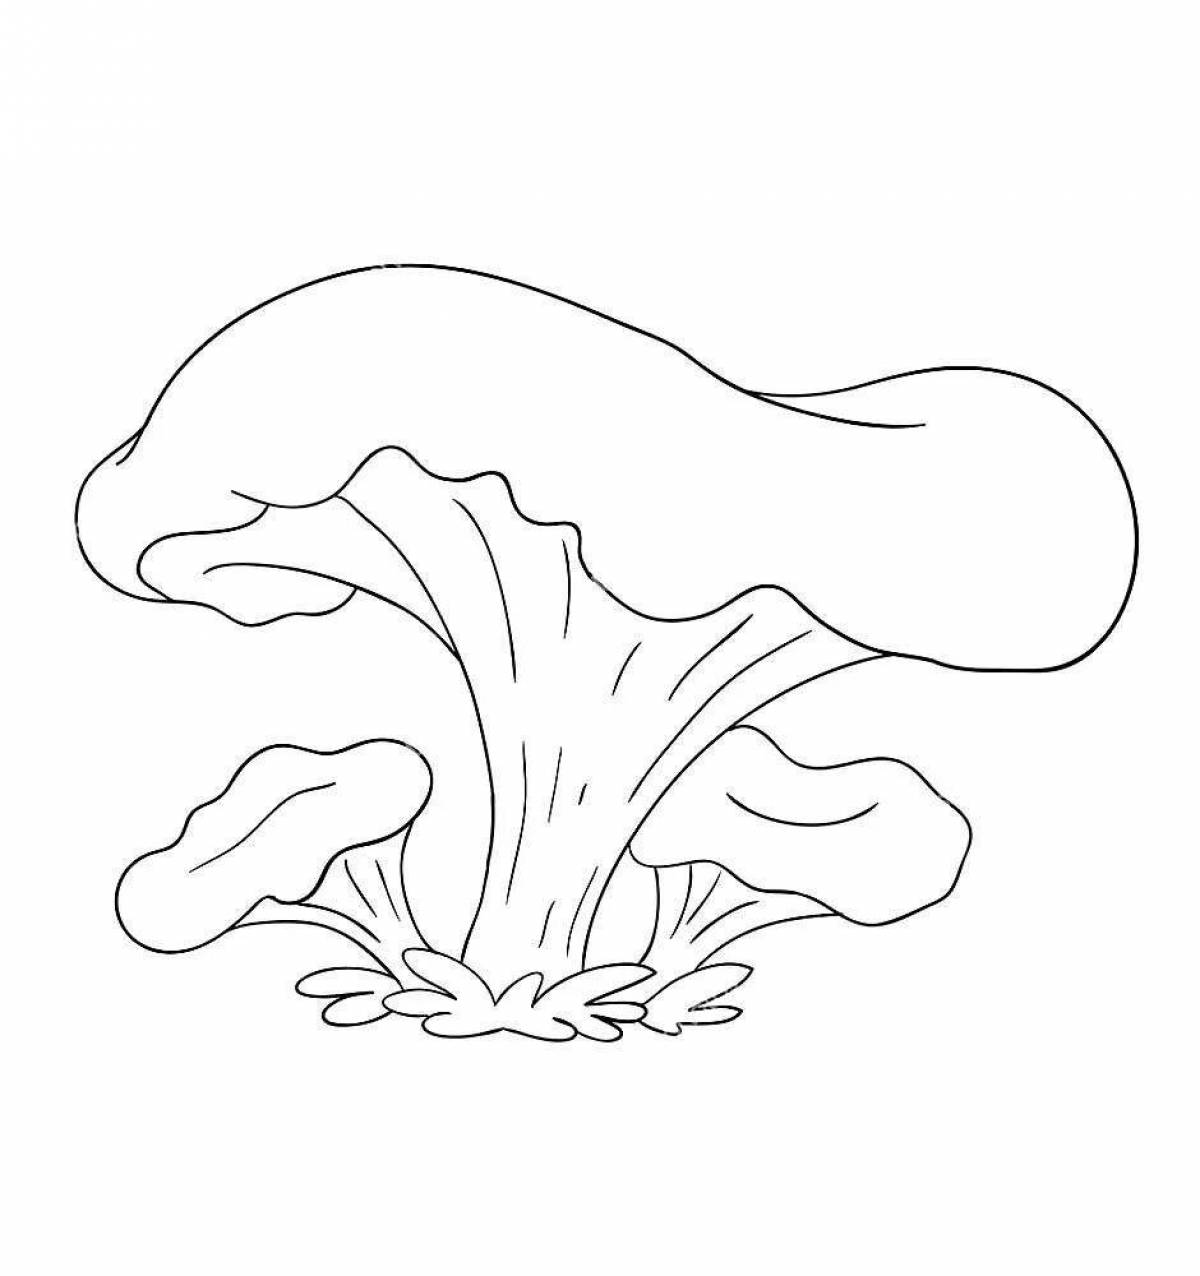 Coloring page charming chanterelle mushroom